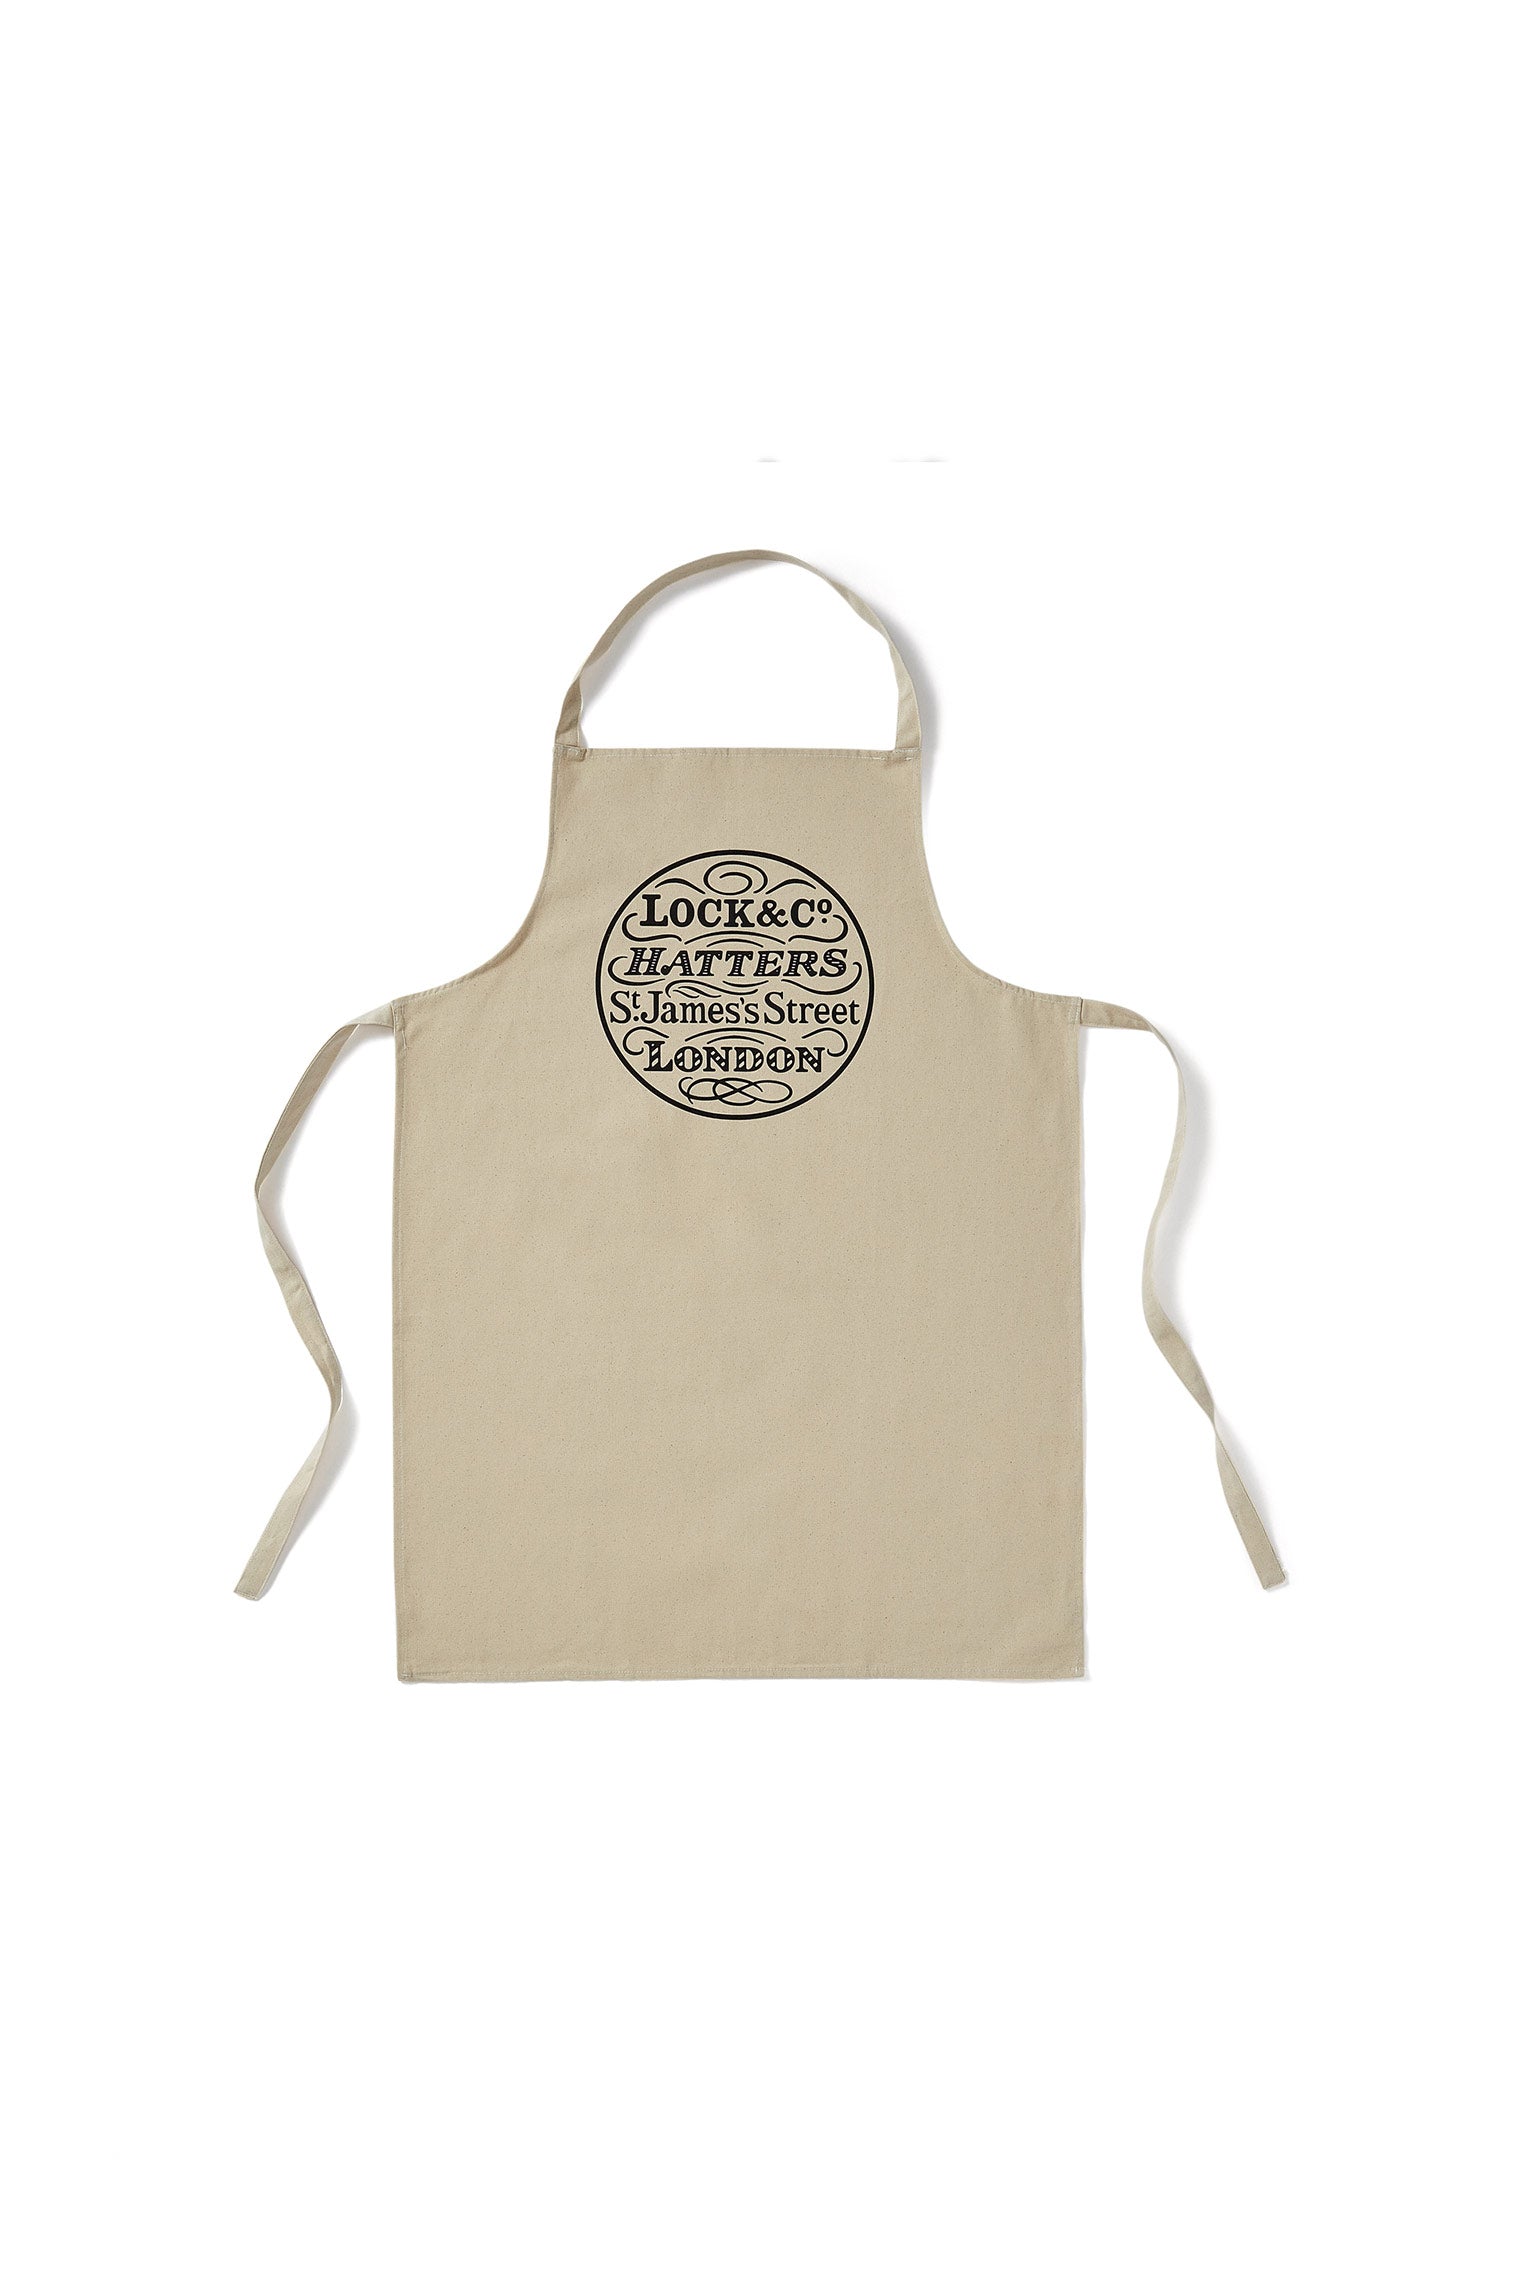 Organic Cotton-Canvas Apron - You May Also Like - Lock & Co. Hatters London UK